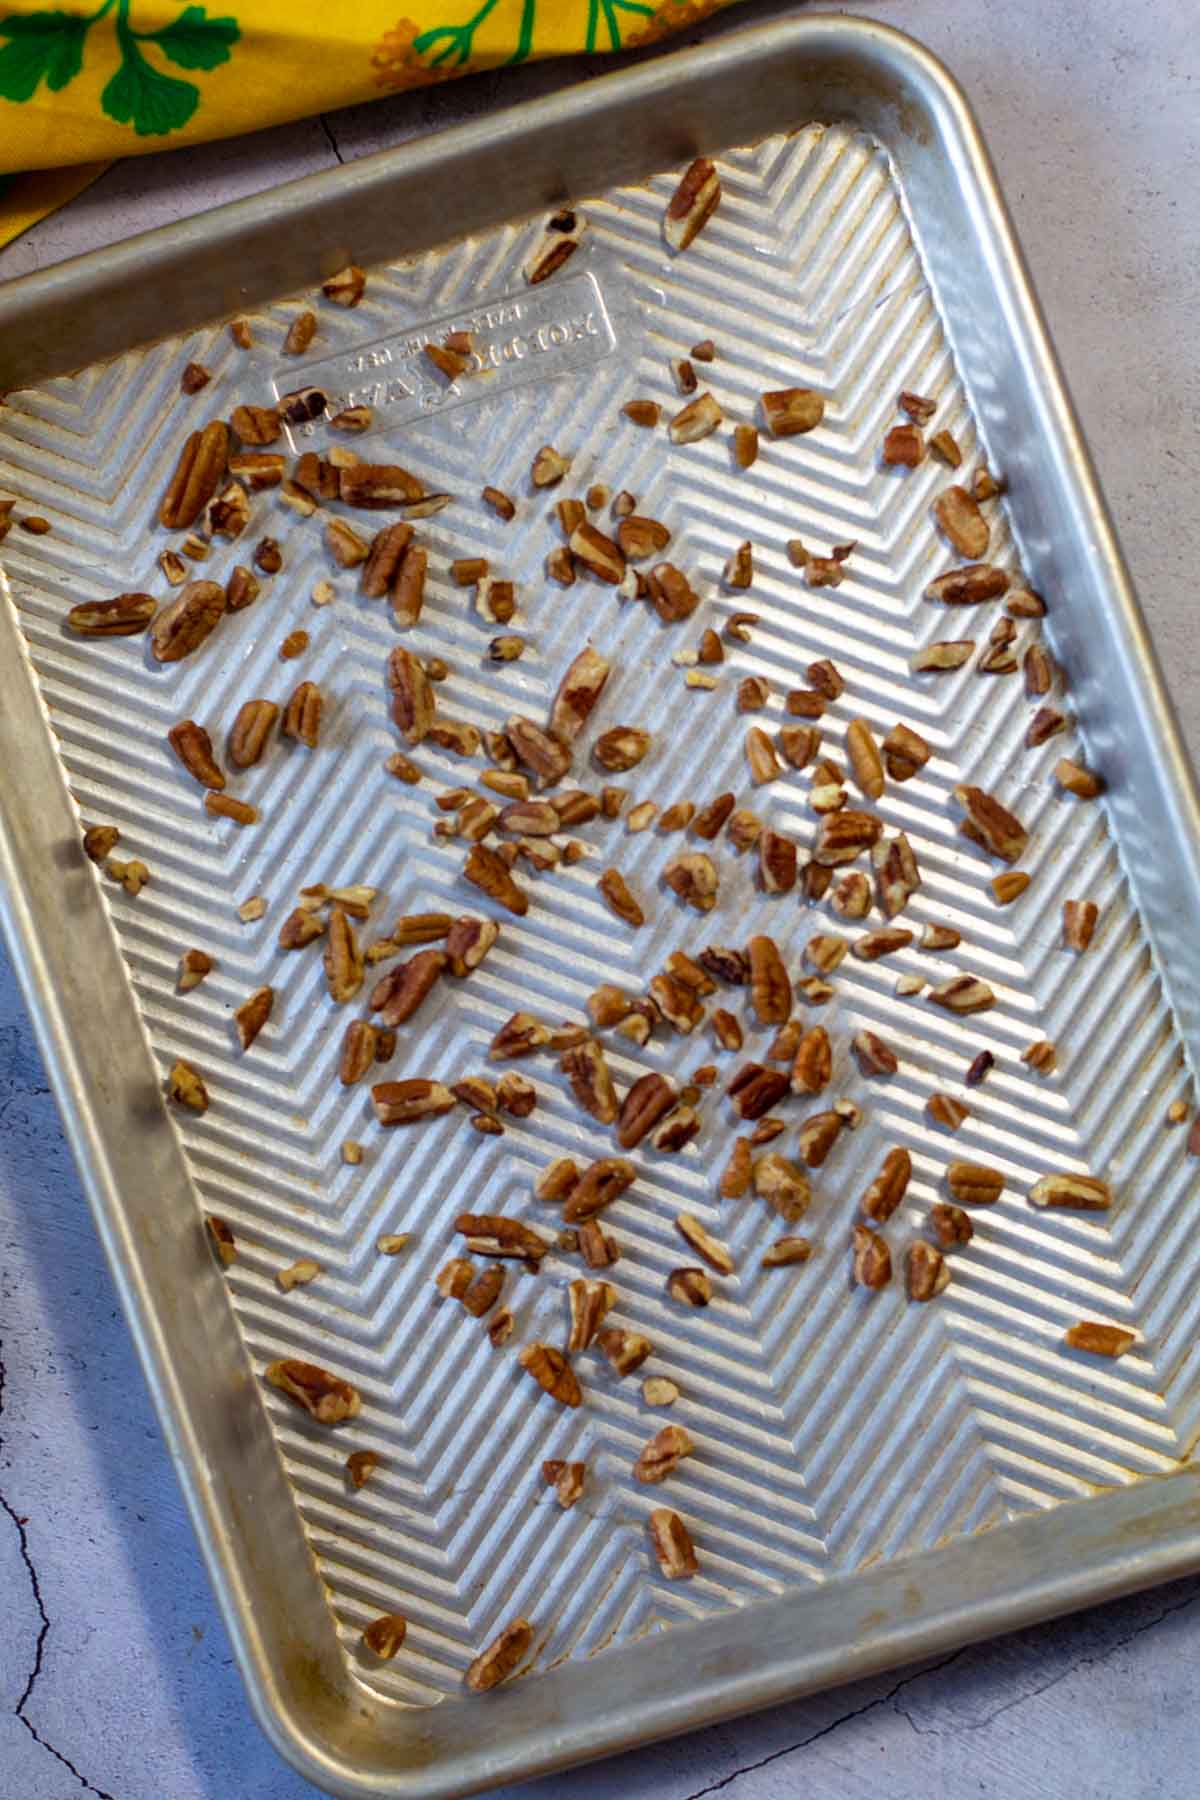 Toasting almonds on a sheet pan.